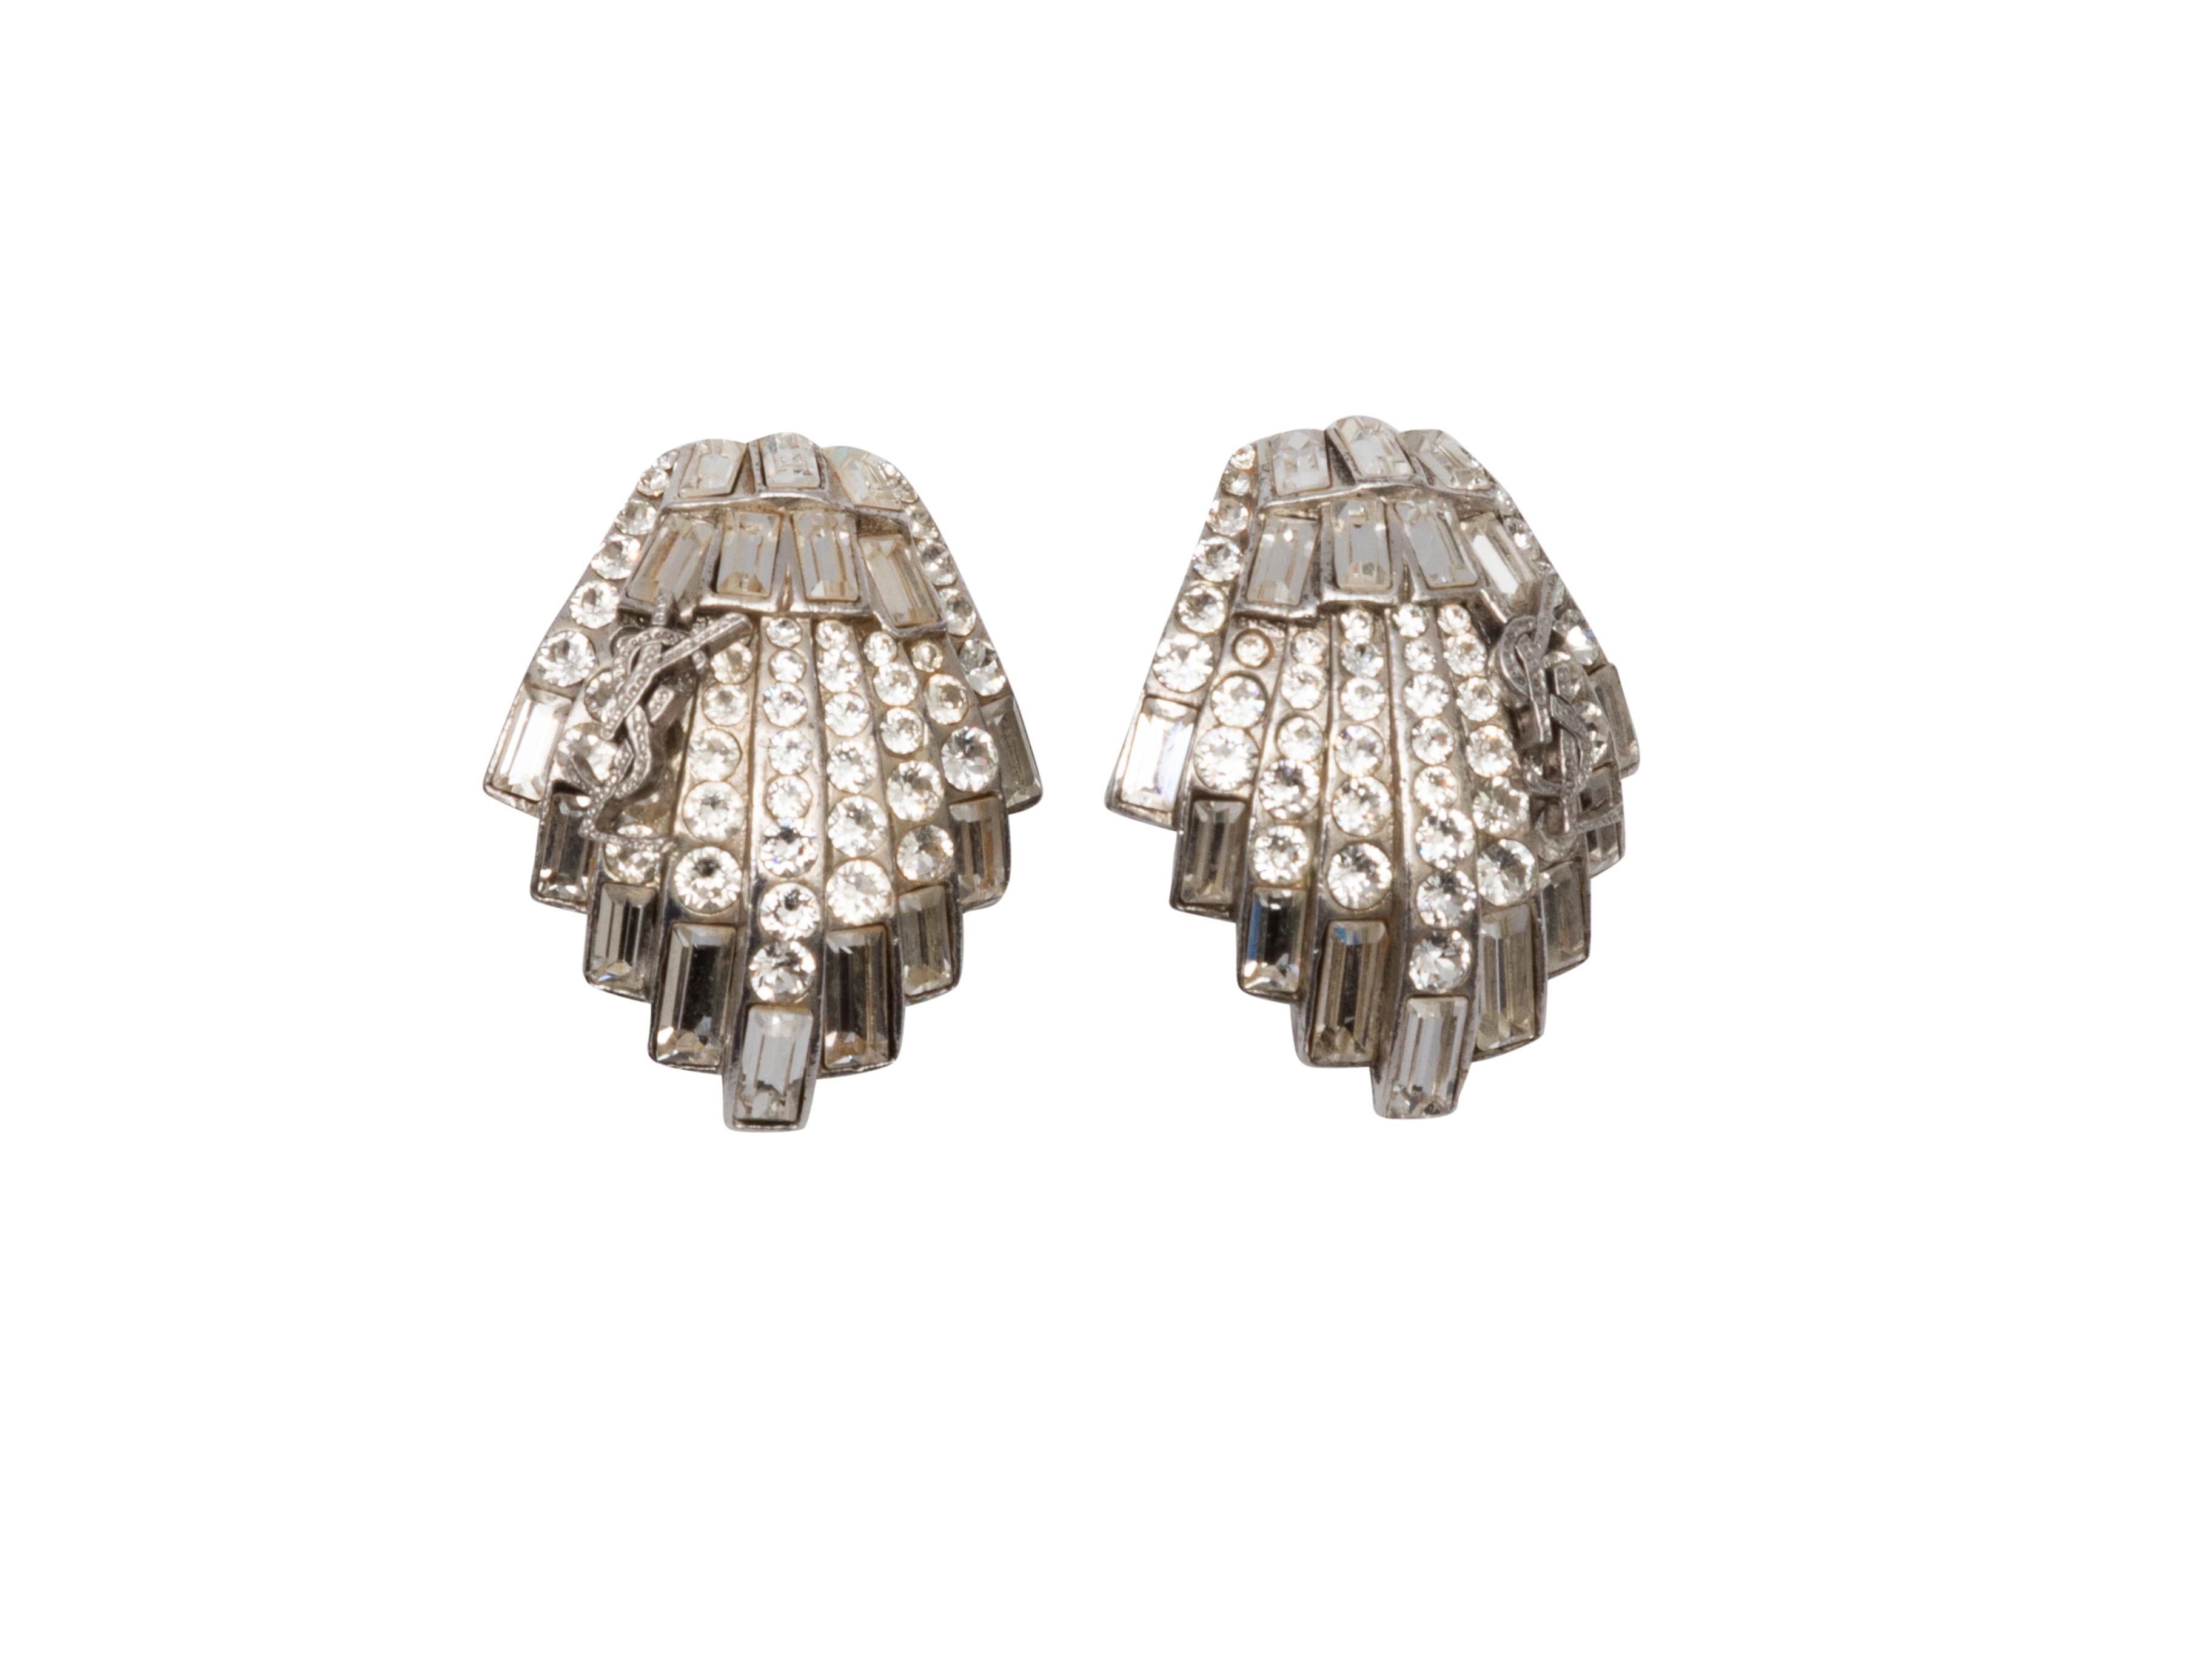 Product Details: Vintage silver-tone and rhinestone clip-on earrings by Yves Saint Laurent. 1